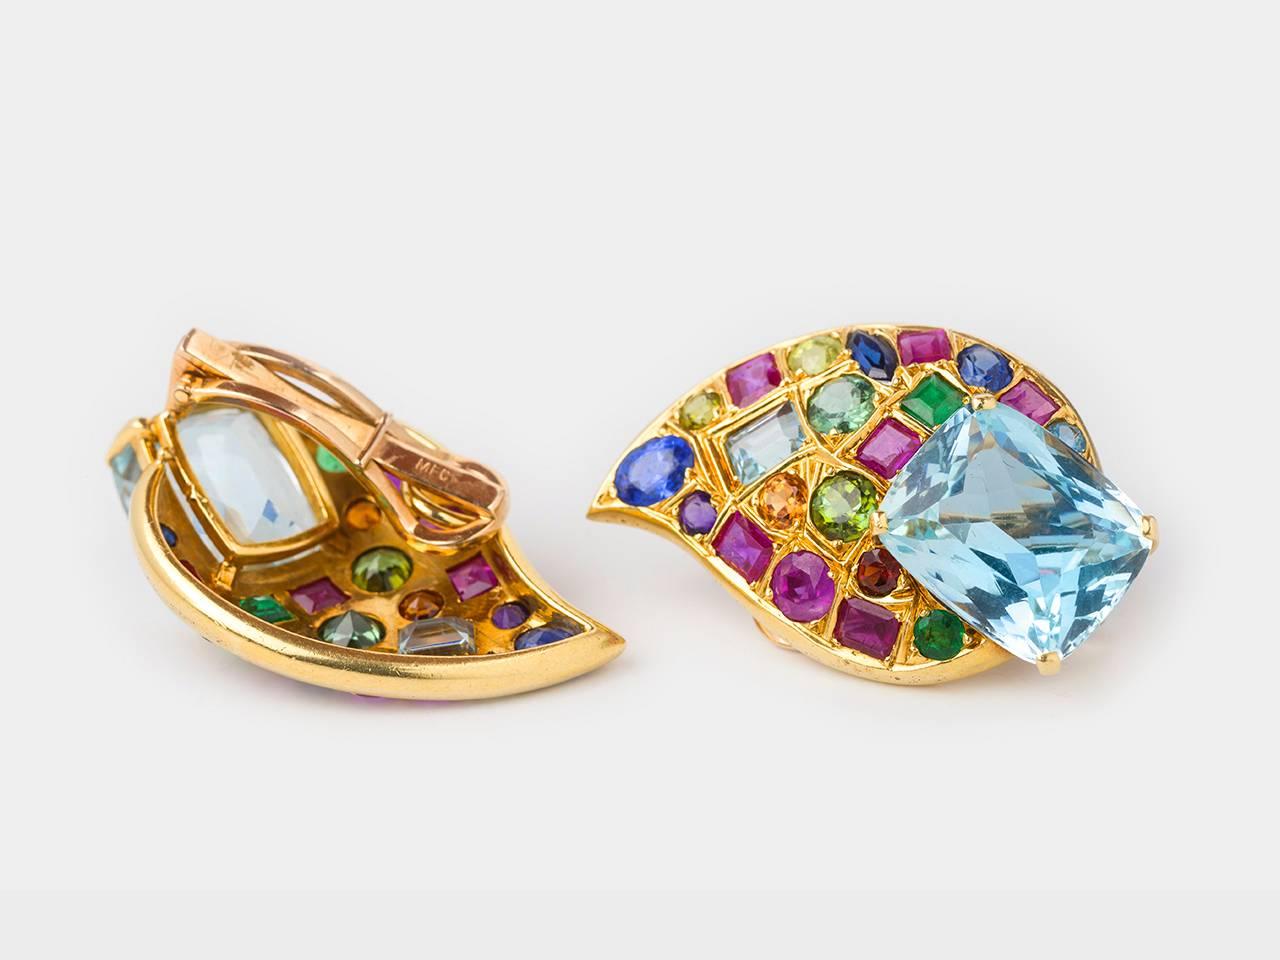 18k gold Earclips in paisley shape, set with multiple precious and semi-precious gemstones.